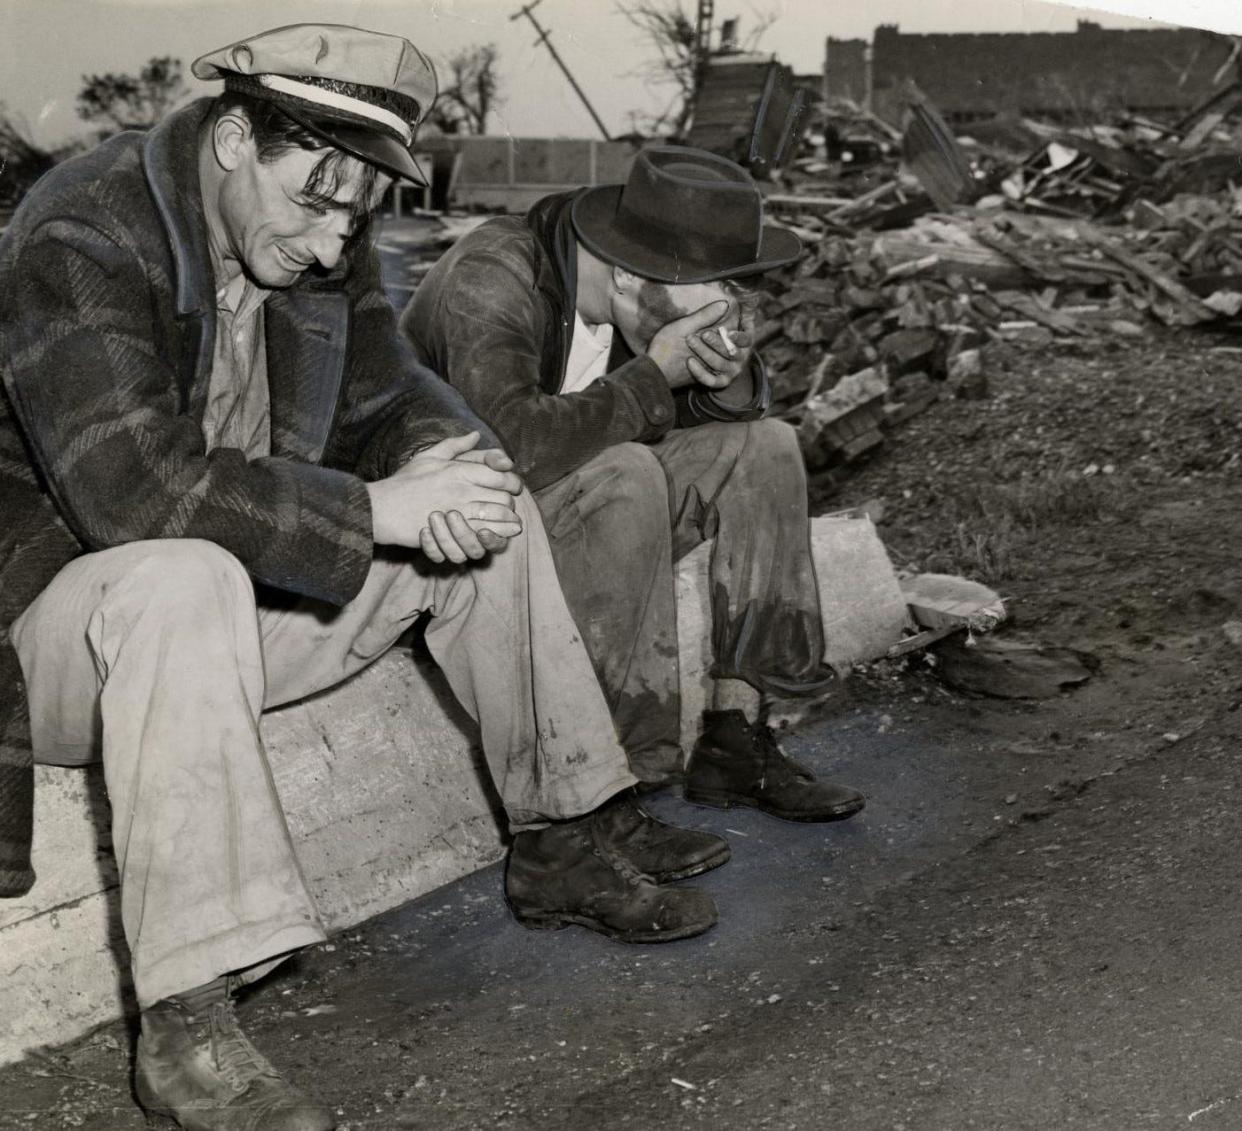 J.E. Taylor and his brother, Clifford, sat on a culvert and weeped, realizing they would have to inform their mother that their 17-year-old brother, Lester, was dead. In truth, he was being treated in a Muskogee hospital. But it was moments of confusion like this that were being played out across the town amid chaos, not knowing the fate of family members and neighbors.